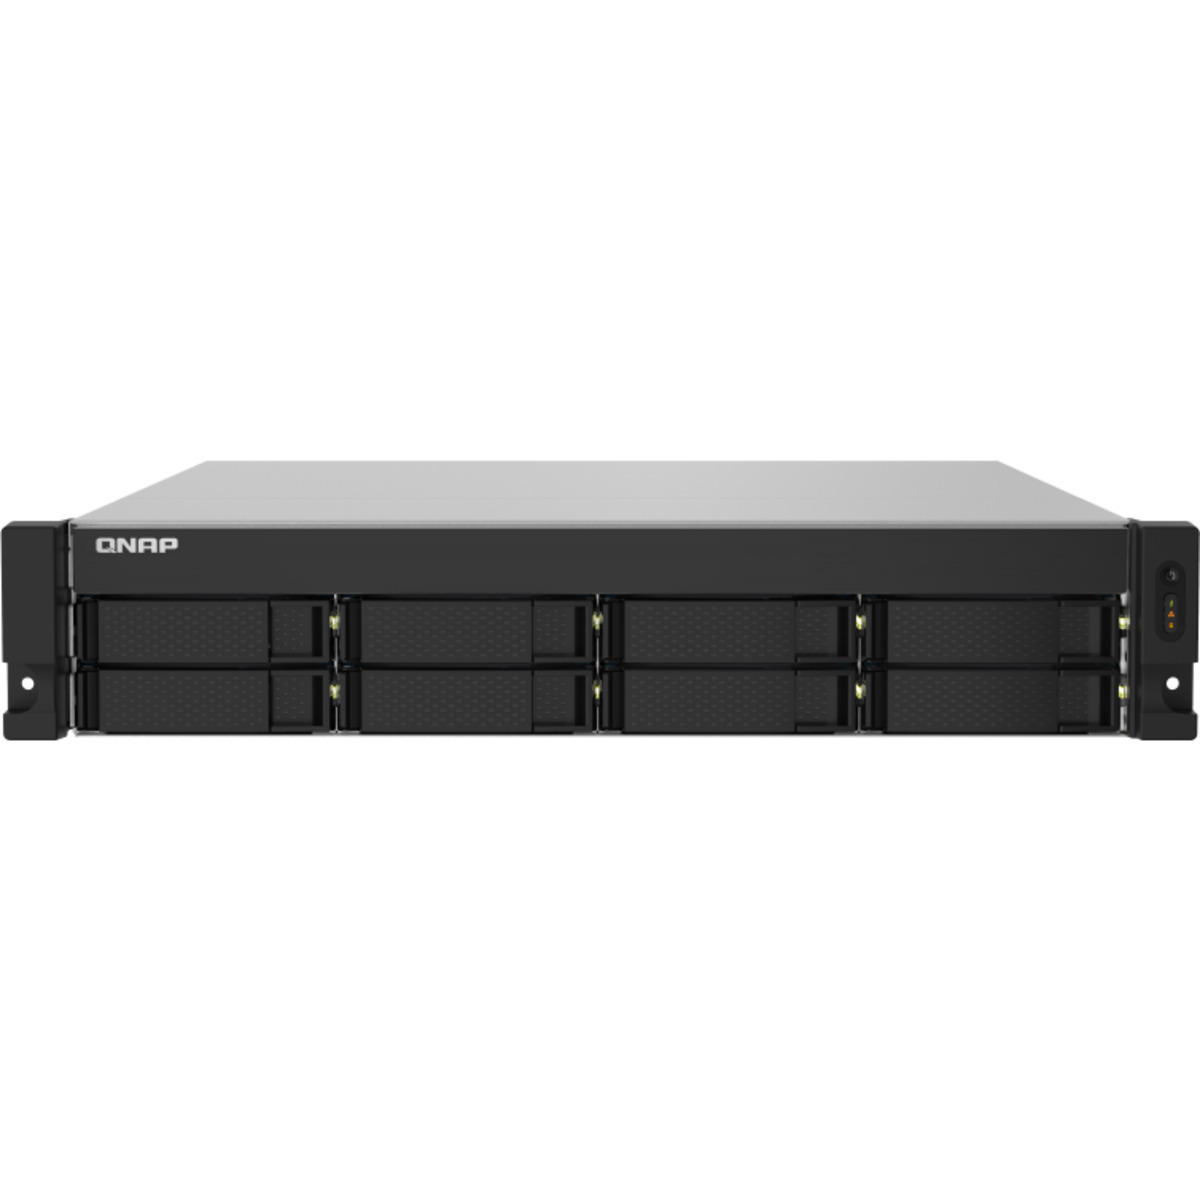 QNAP TS-832PXU-RP 96tb 8-Bay RackMount Personal / Basic Home / Small Office NAS - Network Attached Storage Device 8x12tb Western Digital Red Pro WD121KFBX 3.5 7200rpm SATA 6Gb/s HDD NAS Class Drives Installed - Burn-In Tested - FREE RAM UPGRADE TS-832PXU-RP